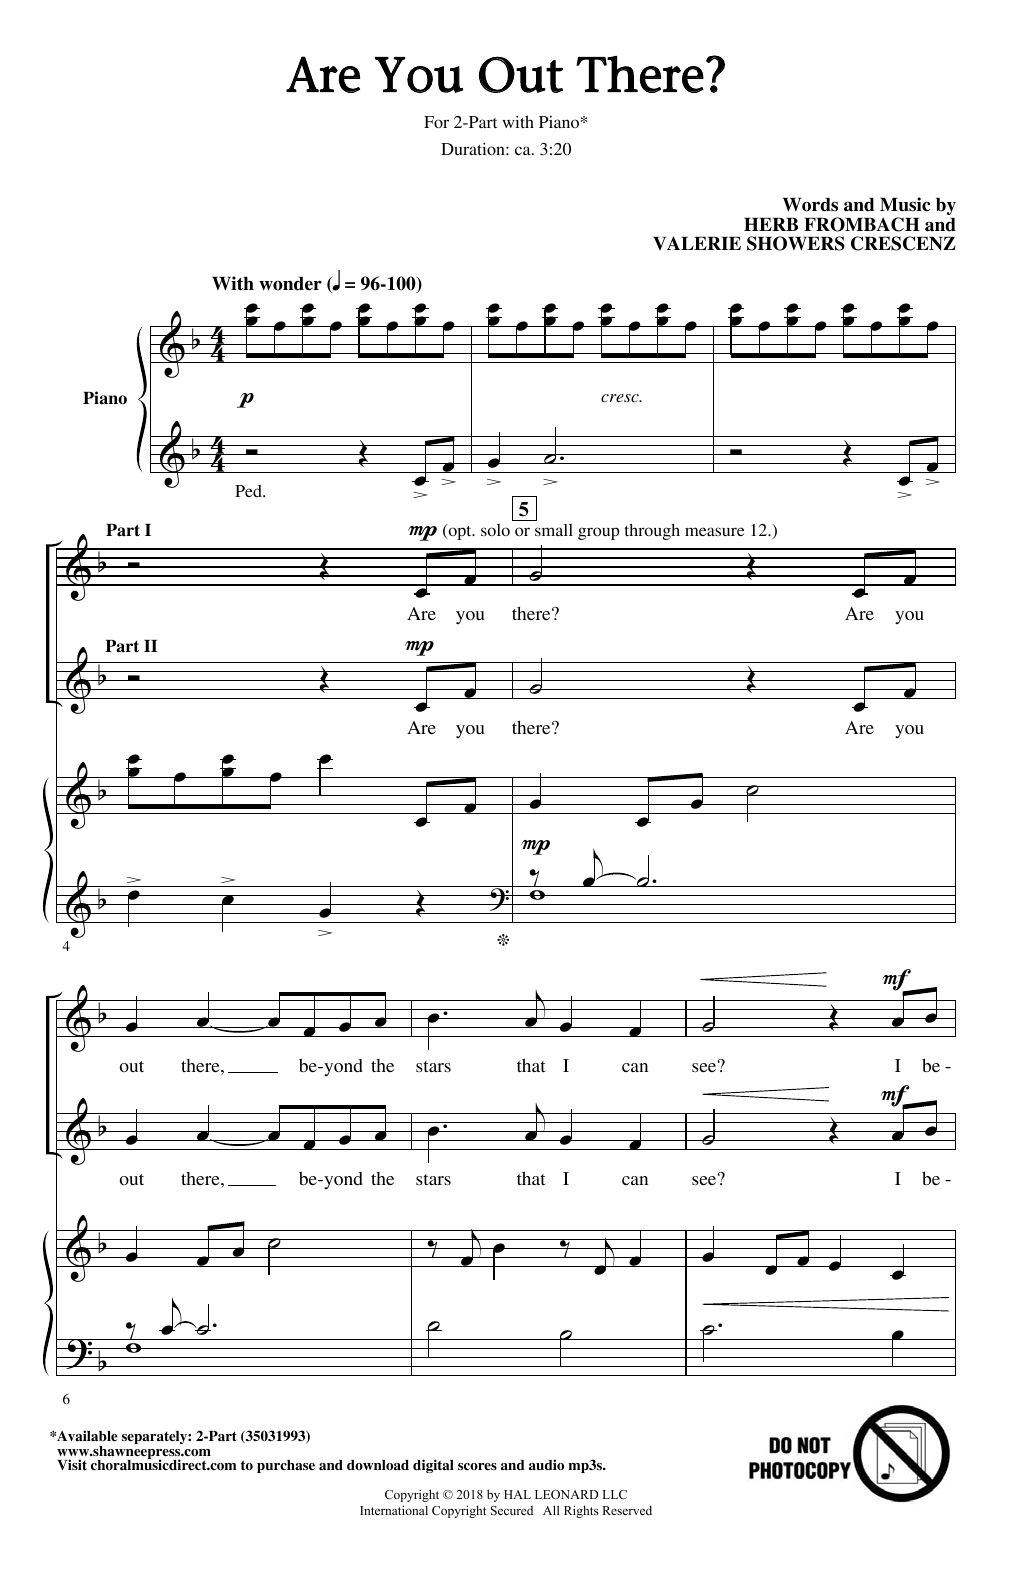 Download Herb Frombach Are You Out There? Sheet Music